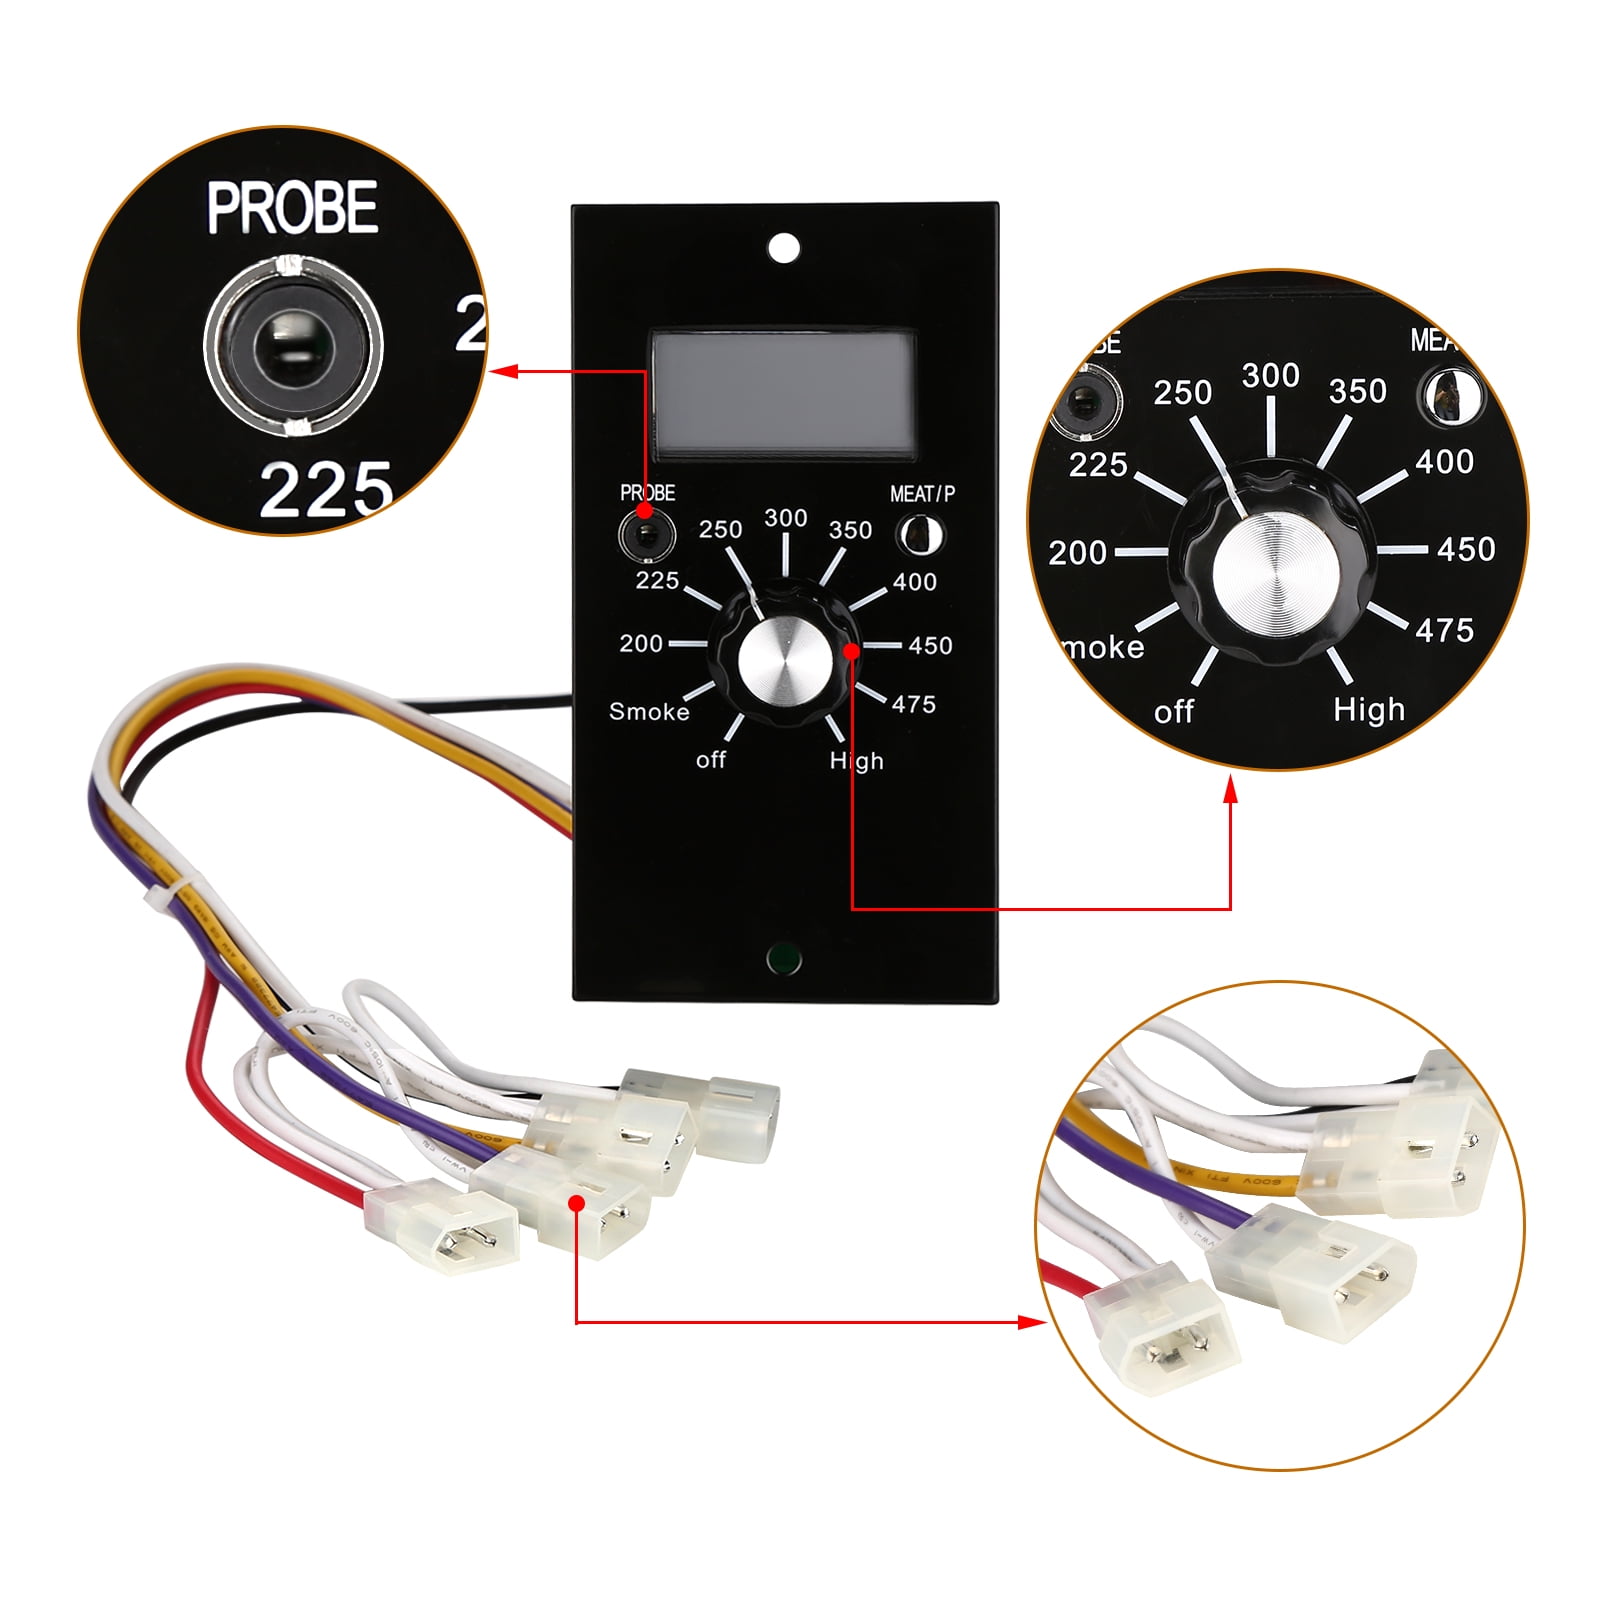 MODULAR PIZZA OVEN THERMOSTAT SPARE PARTS OPERATING CONTROL SWITCH 0 TO 500 °C